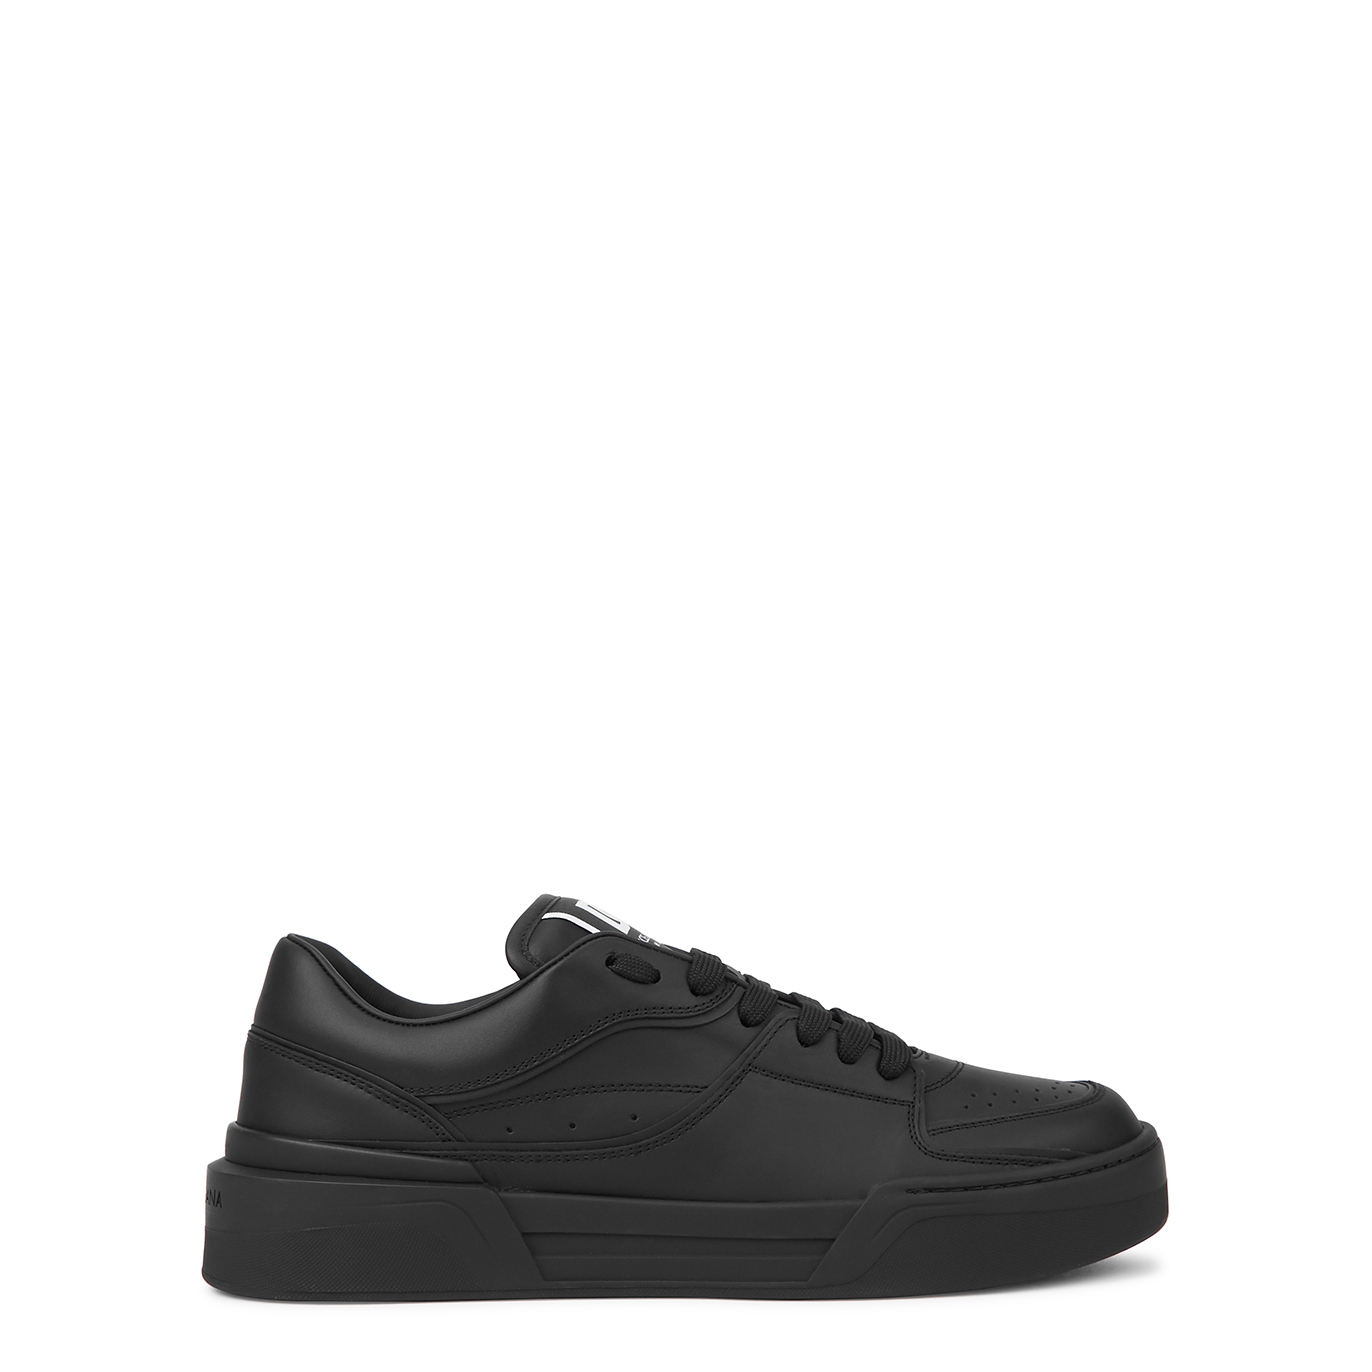 Dolce & Gabbana New Roma Black Leather Sneakers - 10